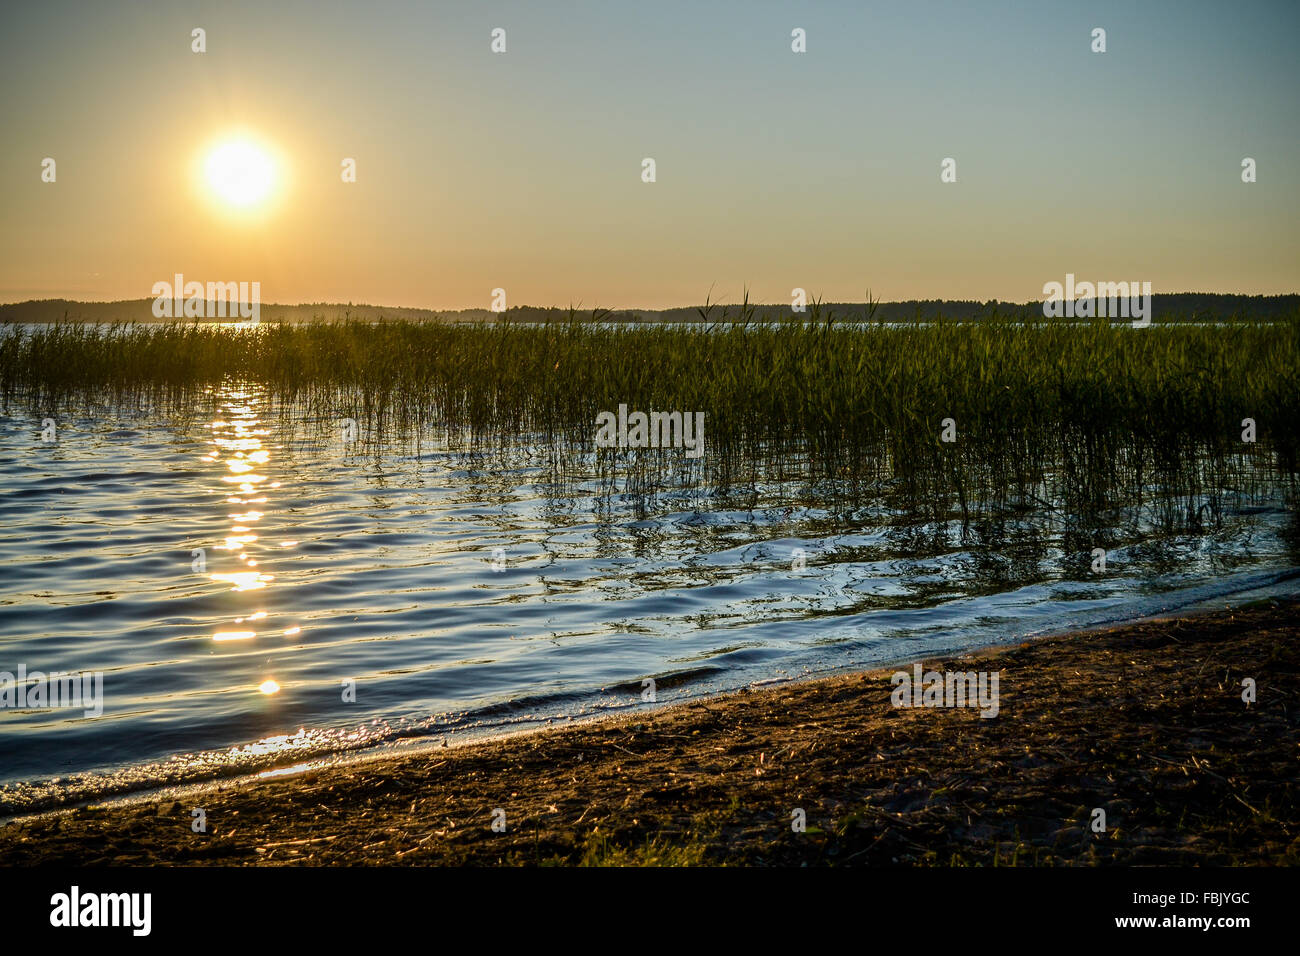 The evening sun sets over the stunning Lake Plateliai in Lithuania Stock Photo